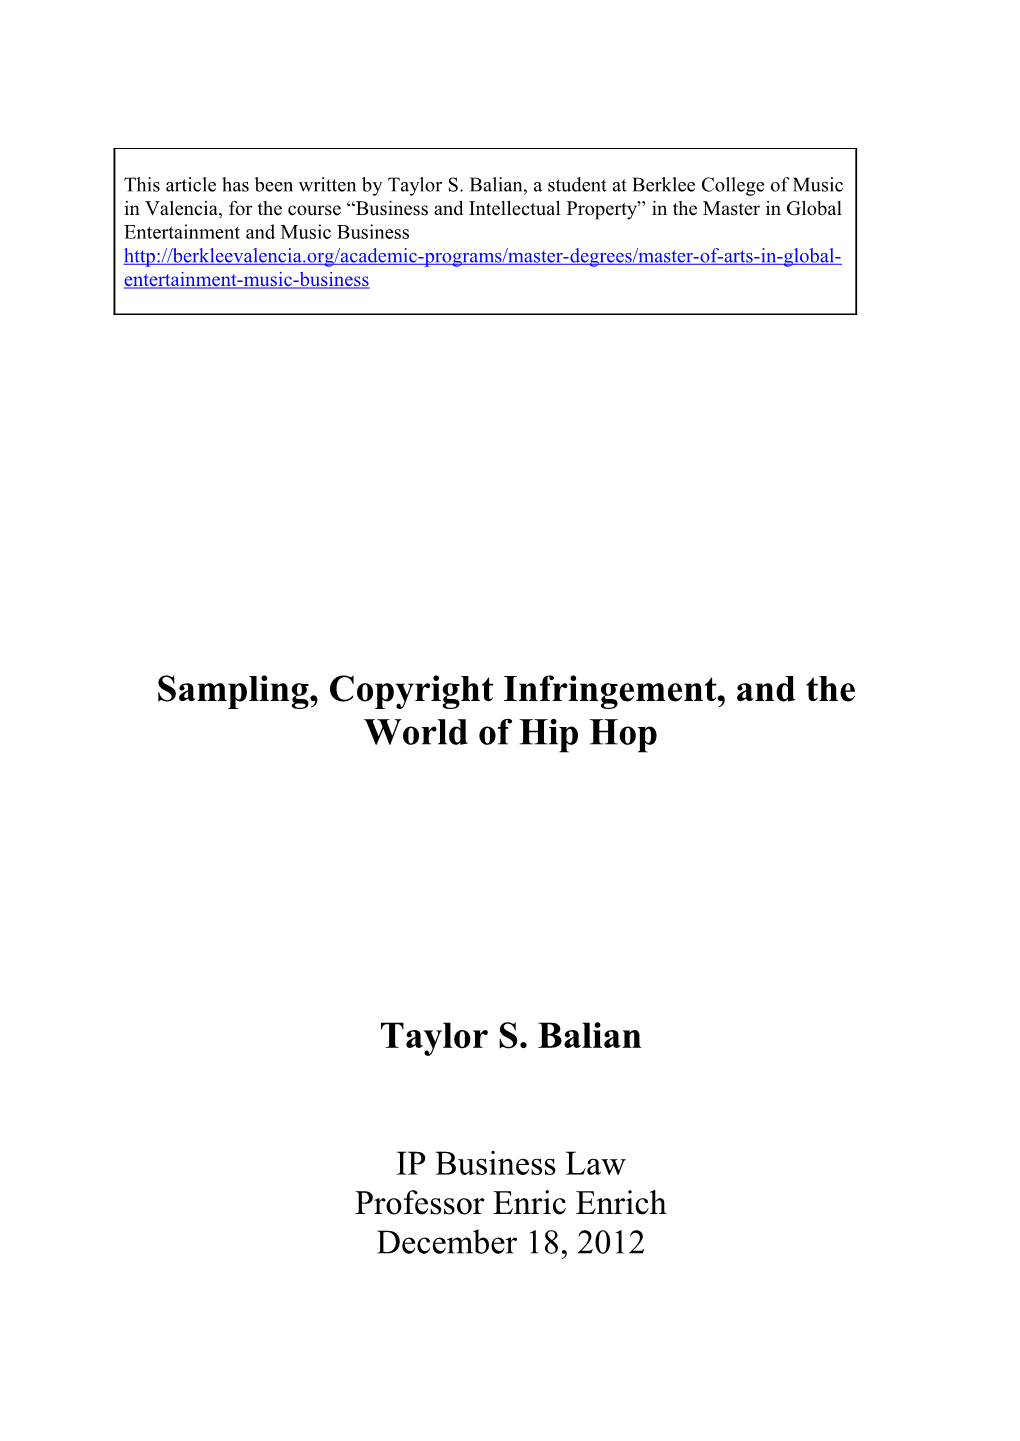 Sampling, Copyright Infringement, and The